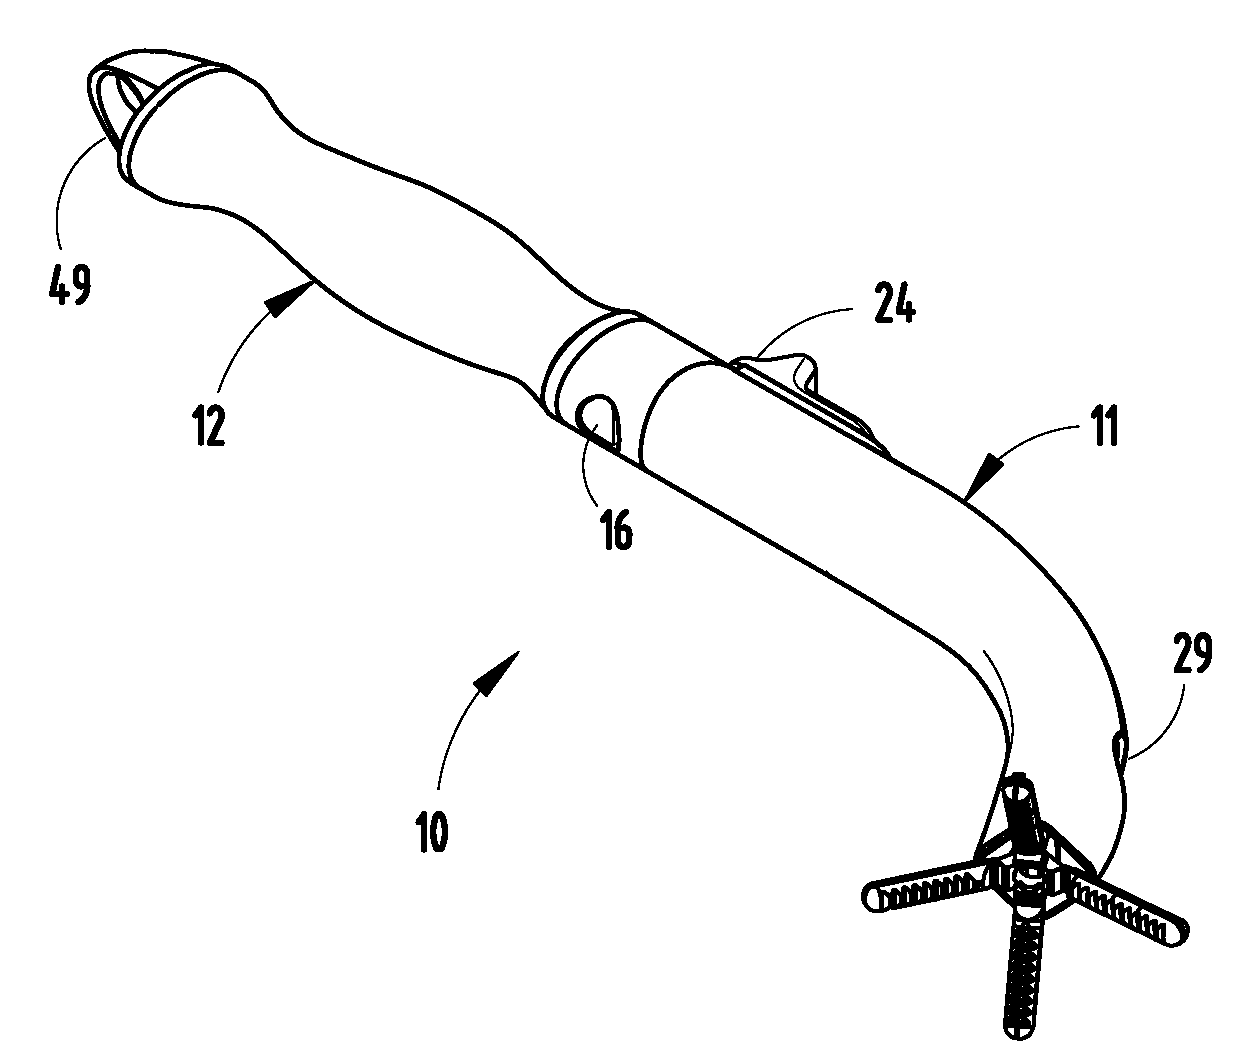 Long-handled device for personal hygiene and daily living